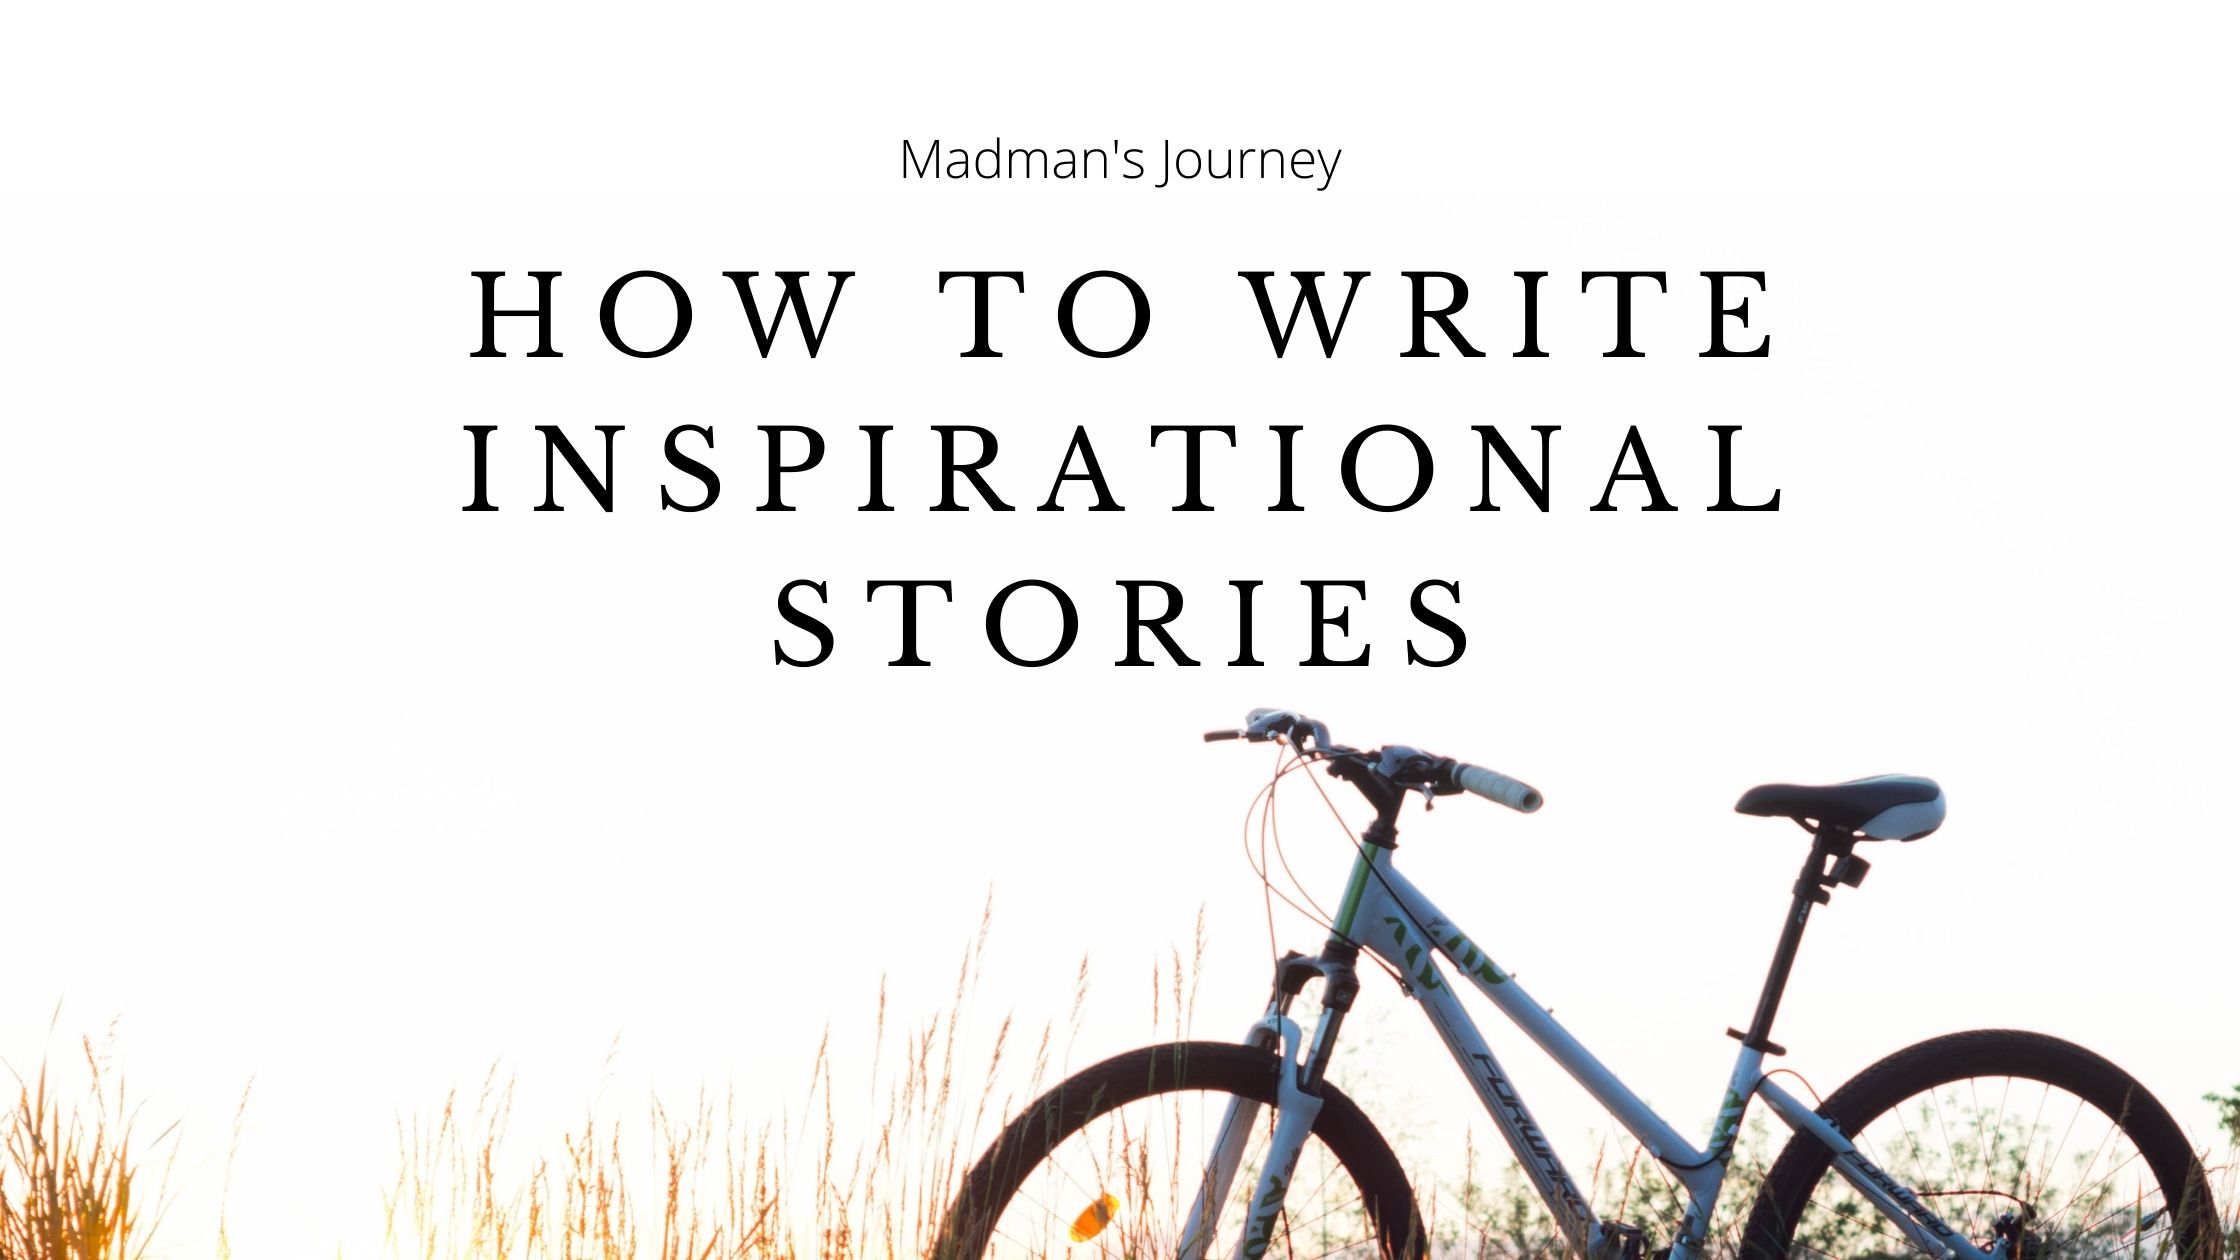 How to Write Inspirational Stories in 6 Easy Steps